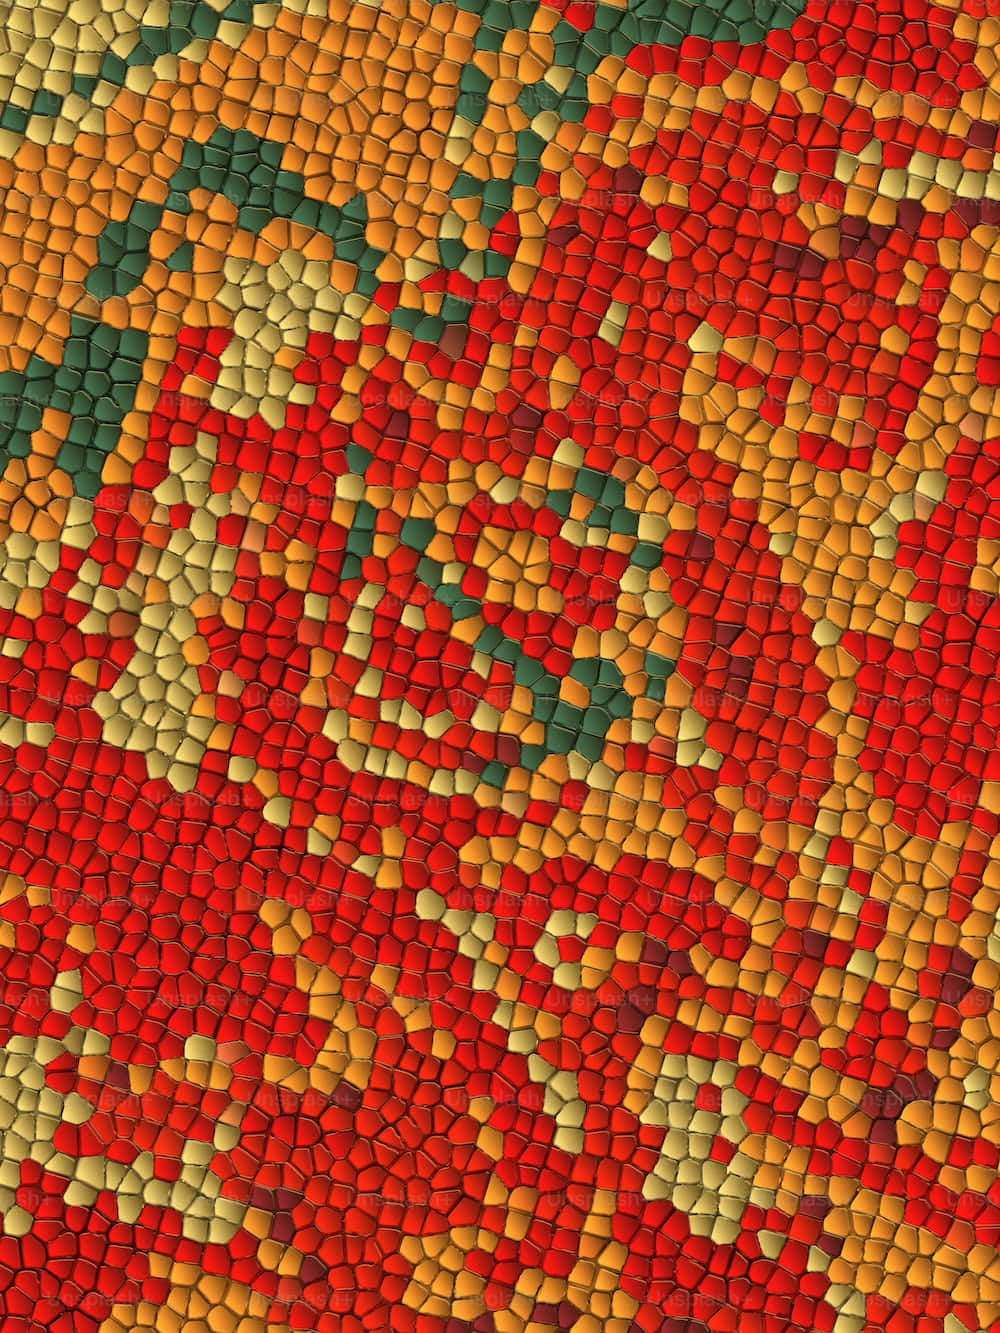 A Red, Green, And Yellow Mosaic Pattern